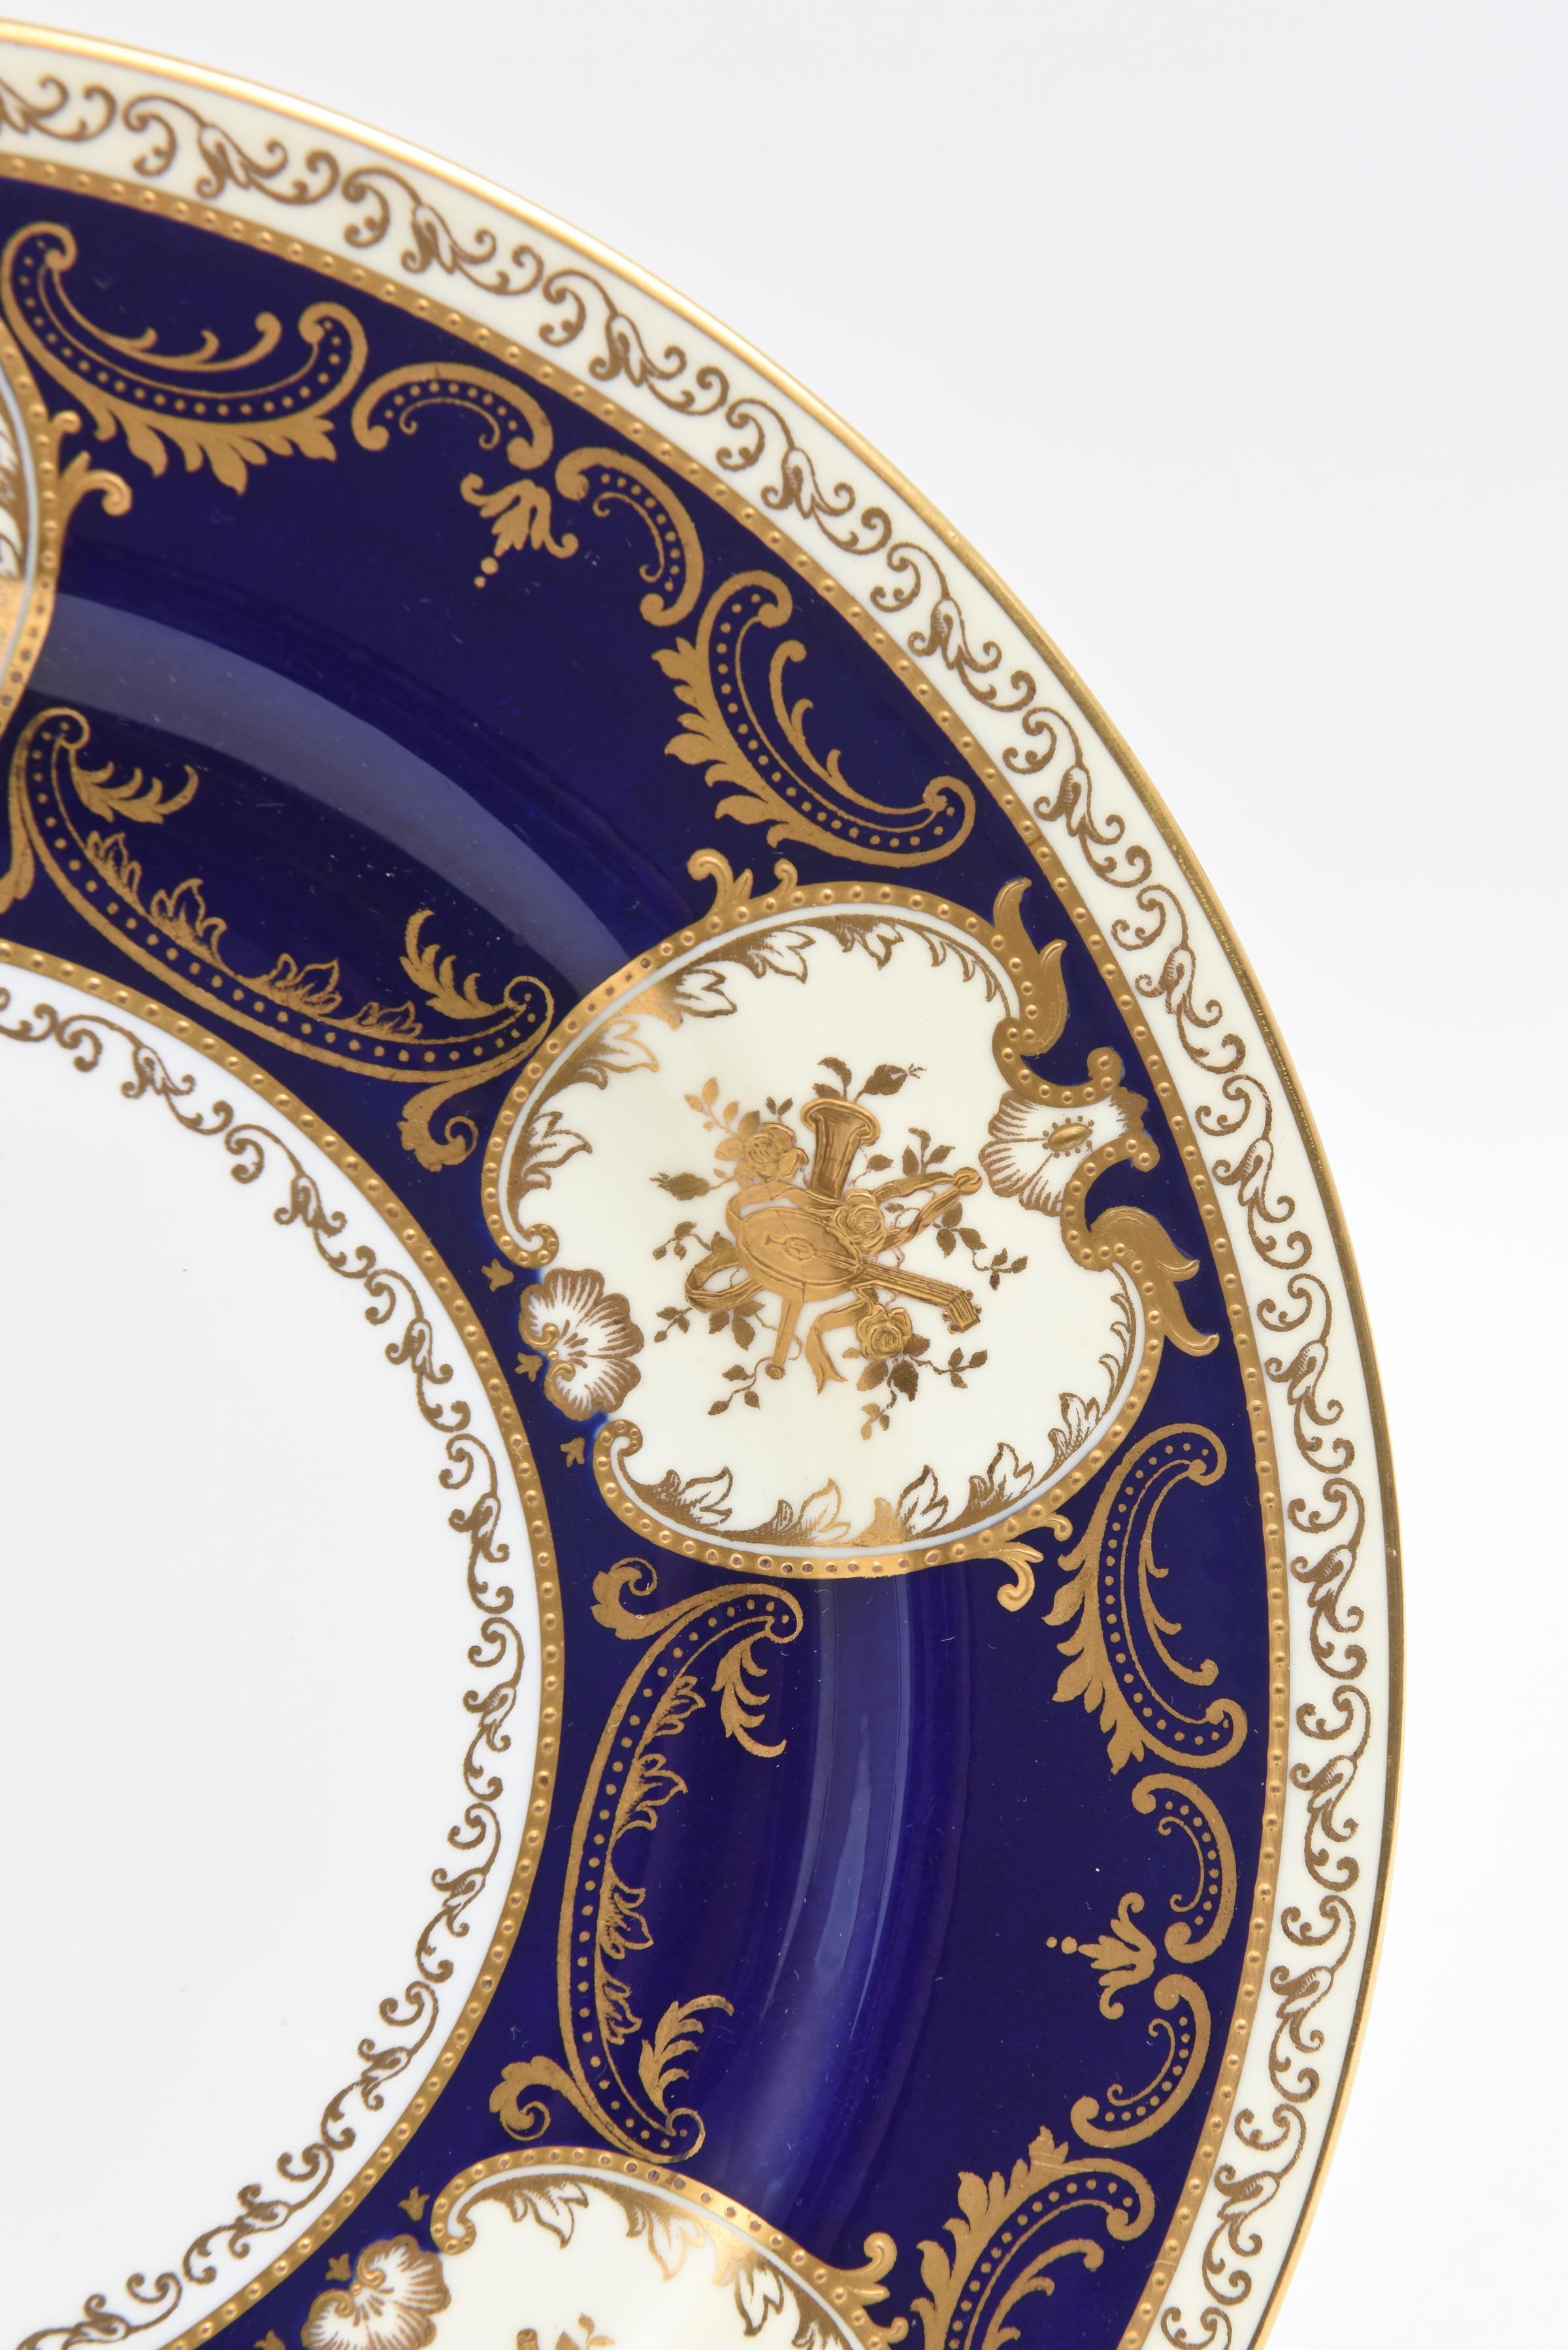 A rare and wonderful custom set of 11 plates from Copeland Spode England. Rich Cobalt Blue Extended Collars featuring raised gilt encrusted cartouches of musical instruments. Custom ordered through the fine gilded age Philadelphia firm of J. E.